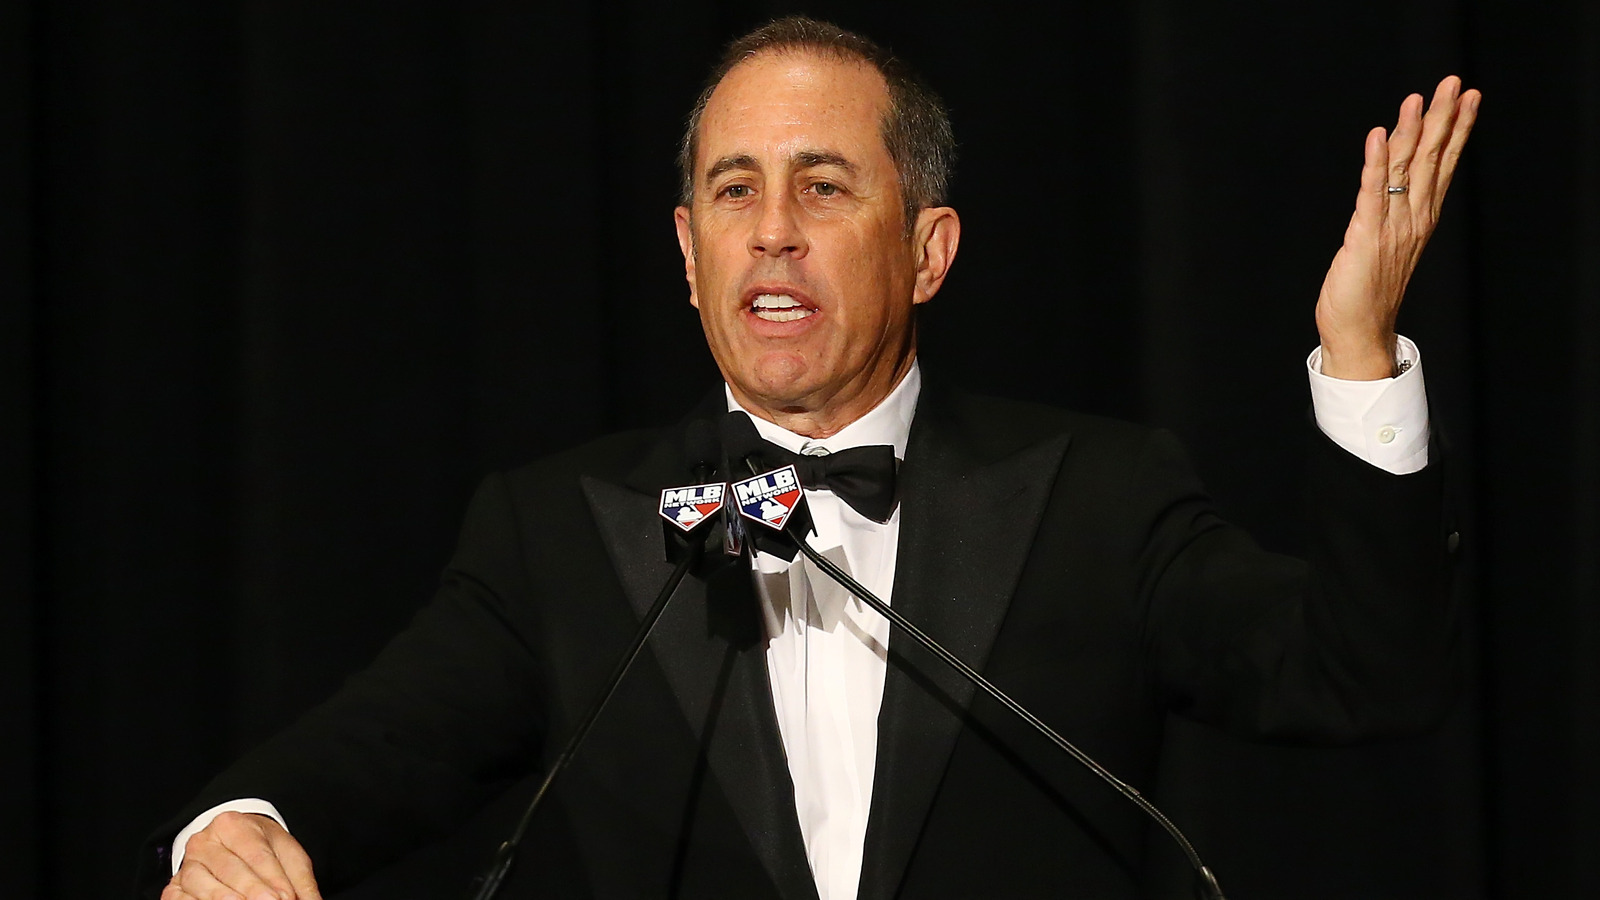 Who Does Jerry Seinfeld Hate? — His Name Was Beeped Out of the Episode